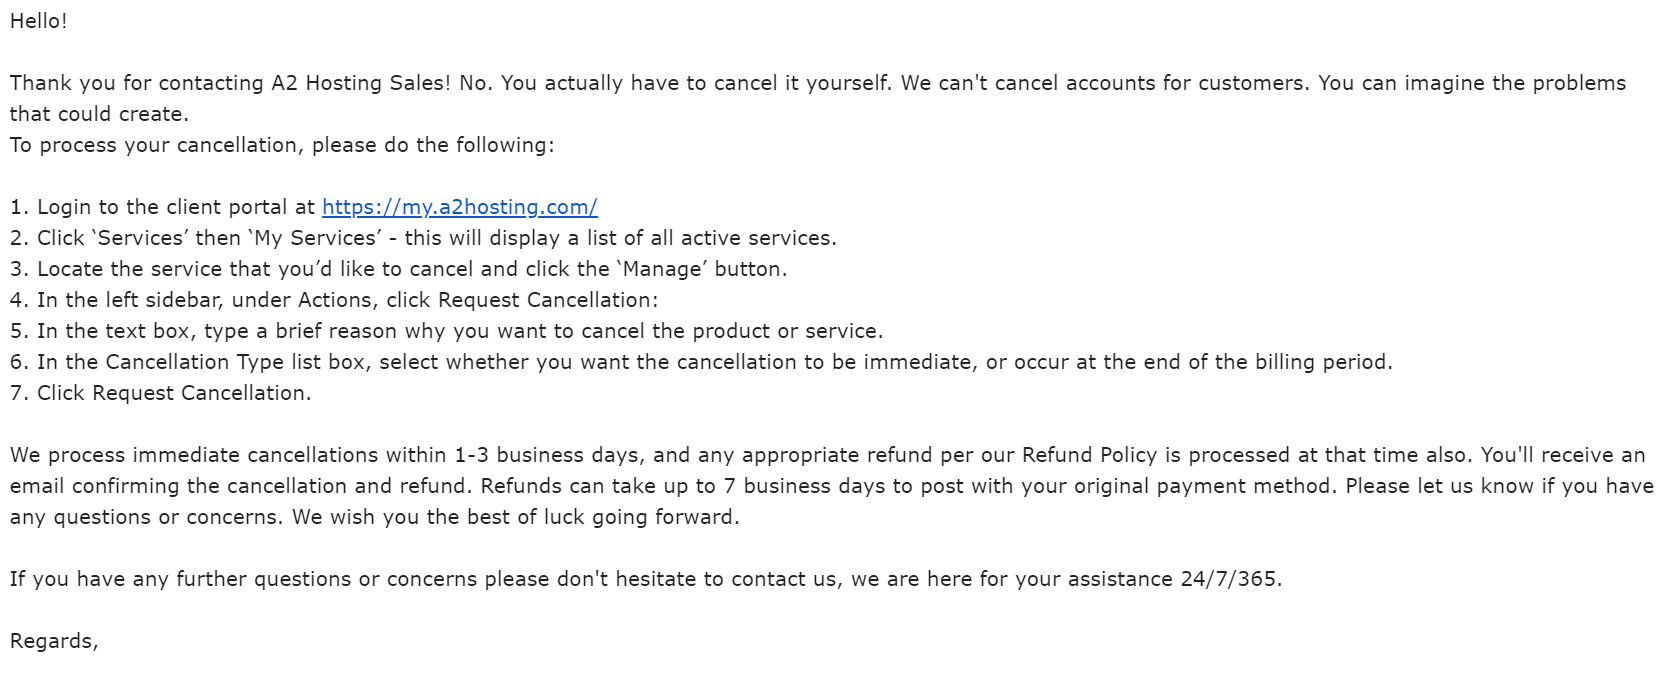 How to Cancel Your A2 Hosting Account and Get a Refund-image8